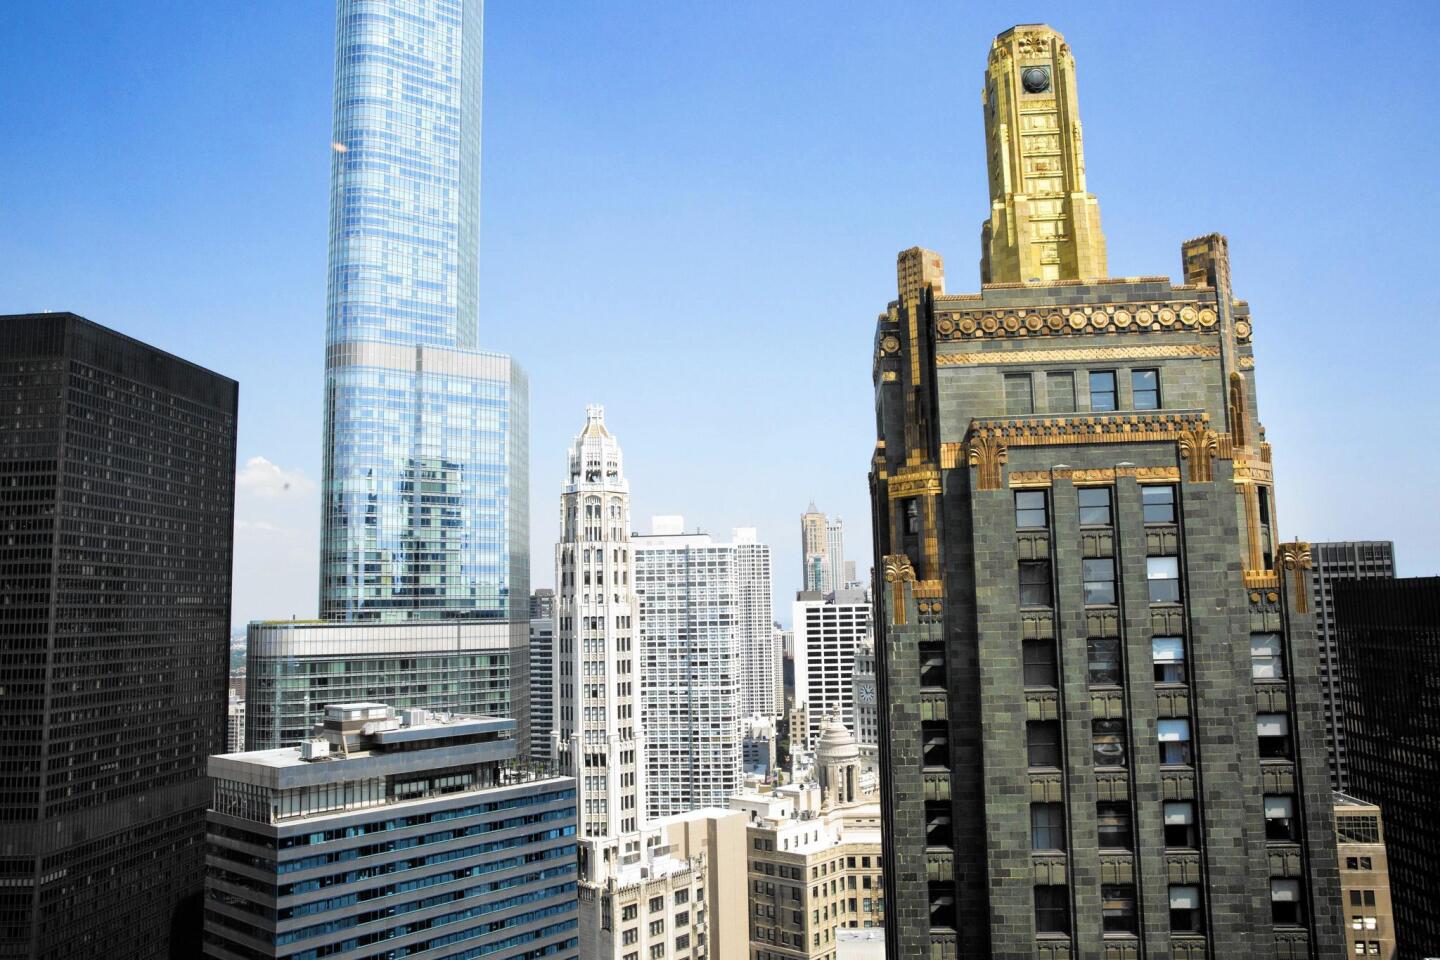 The Carbide and Carbon building, right, is an art deco skyscraper that once housed the Hard Rock Hotel and will now be home to St. Jane, another Michigan Avenue lodging.